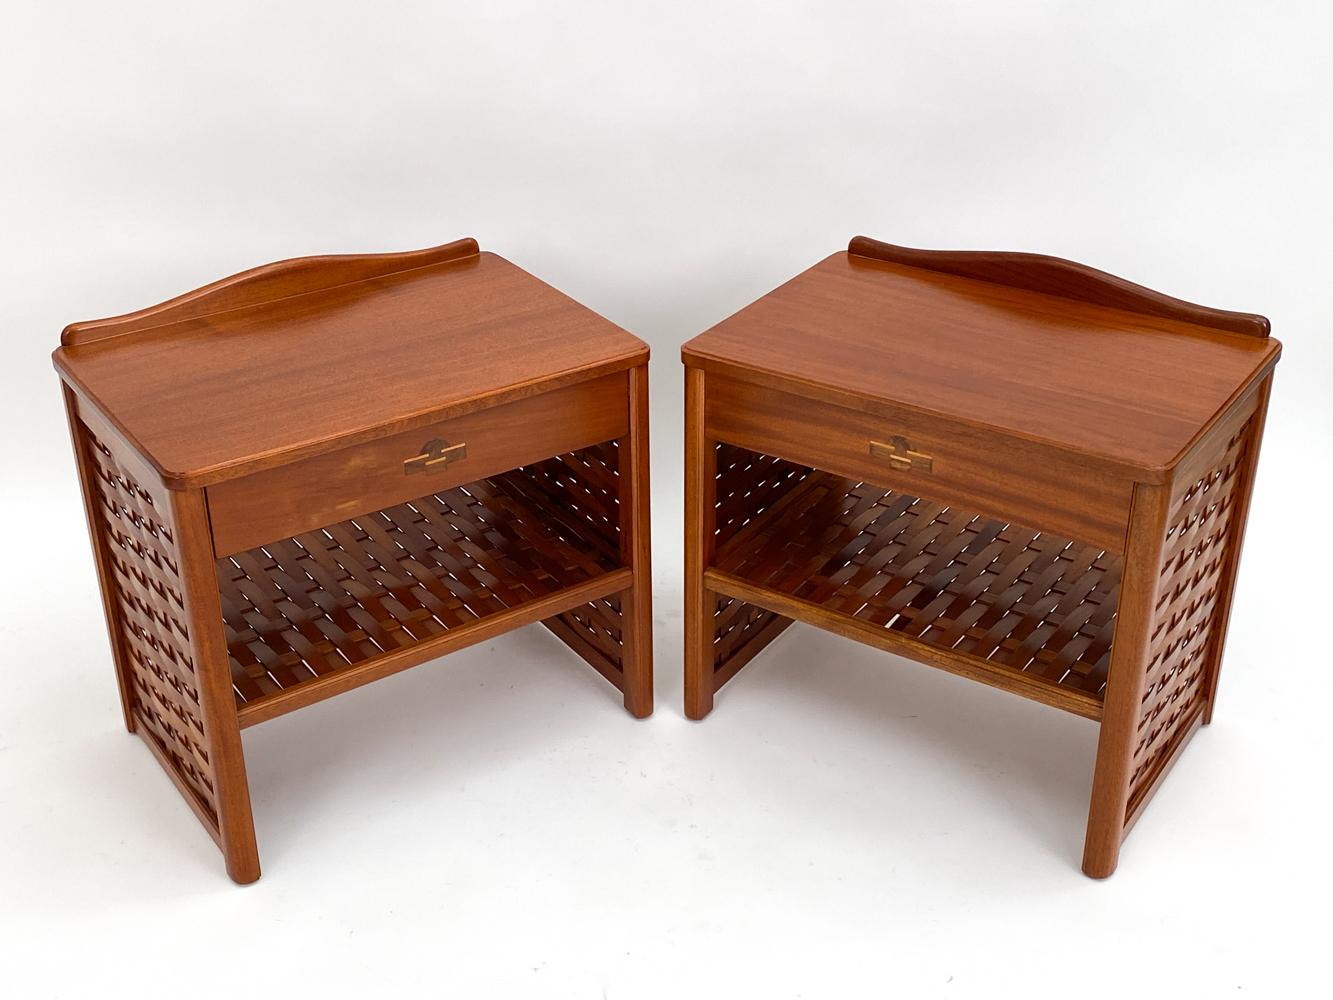 Step into a realm of functional artistry with this pair of exquisite end tables or nightstands by DUX, the renowned maestros of Swedish mid-century design. With every detail meticulously crafted, these tables harmoniously blend the rich allure of